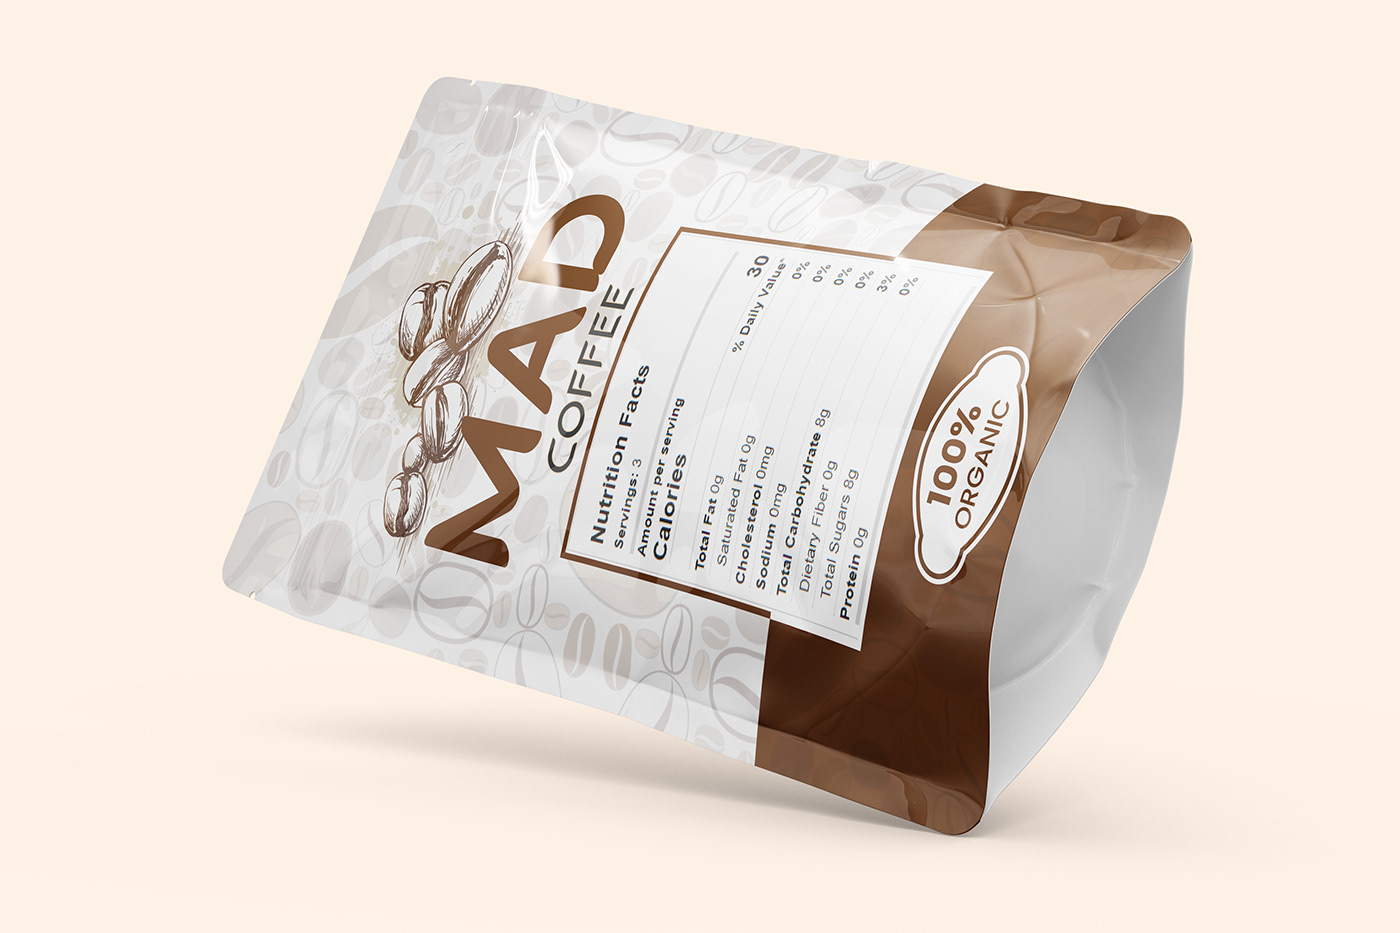 pouch Packaging brand identity coffee pouch label design product packaging Pouch Design  package Pouch Bag Pouch Packaging Design